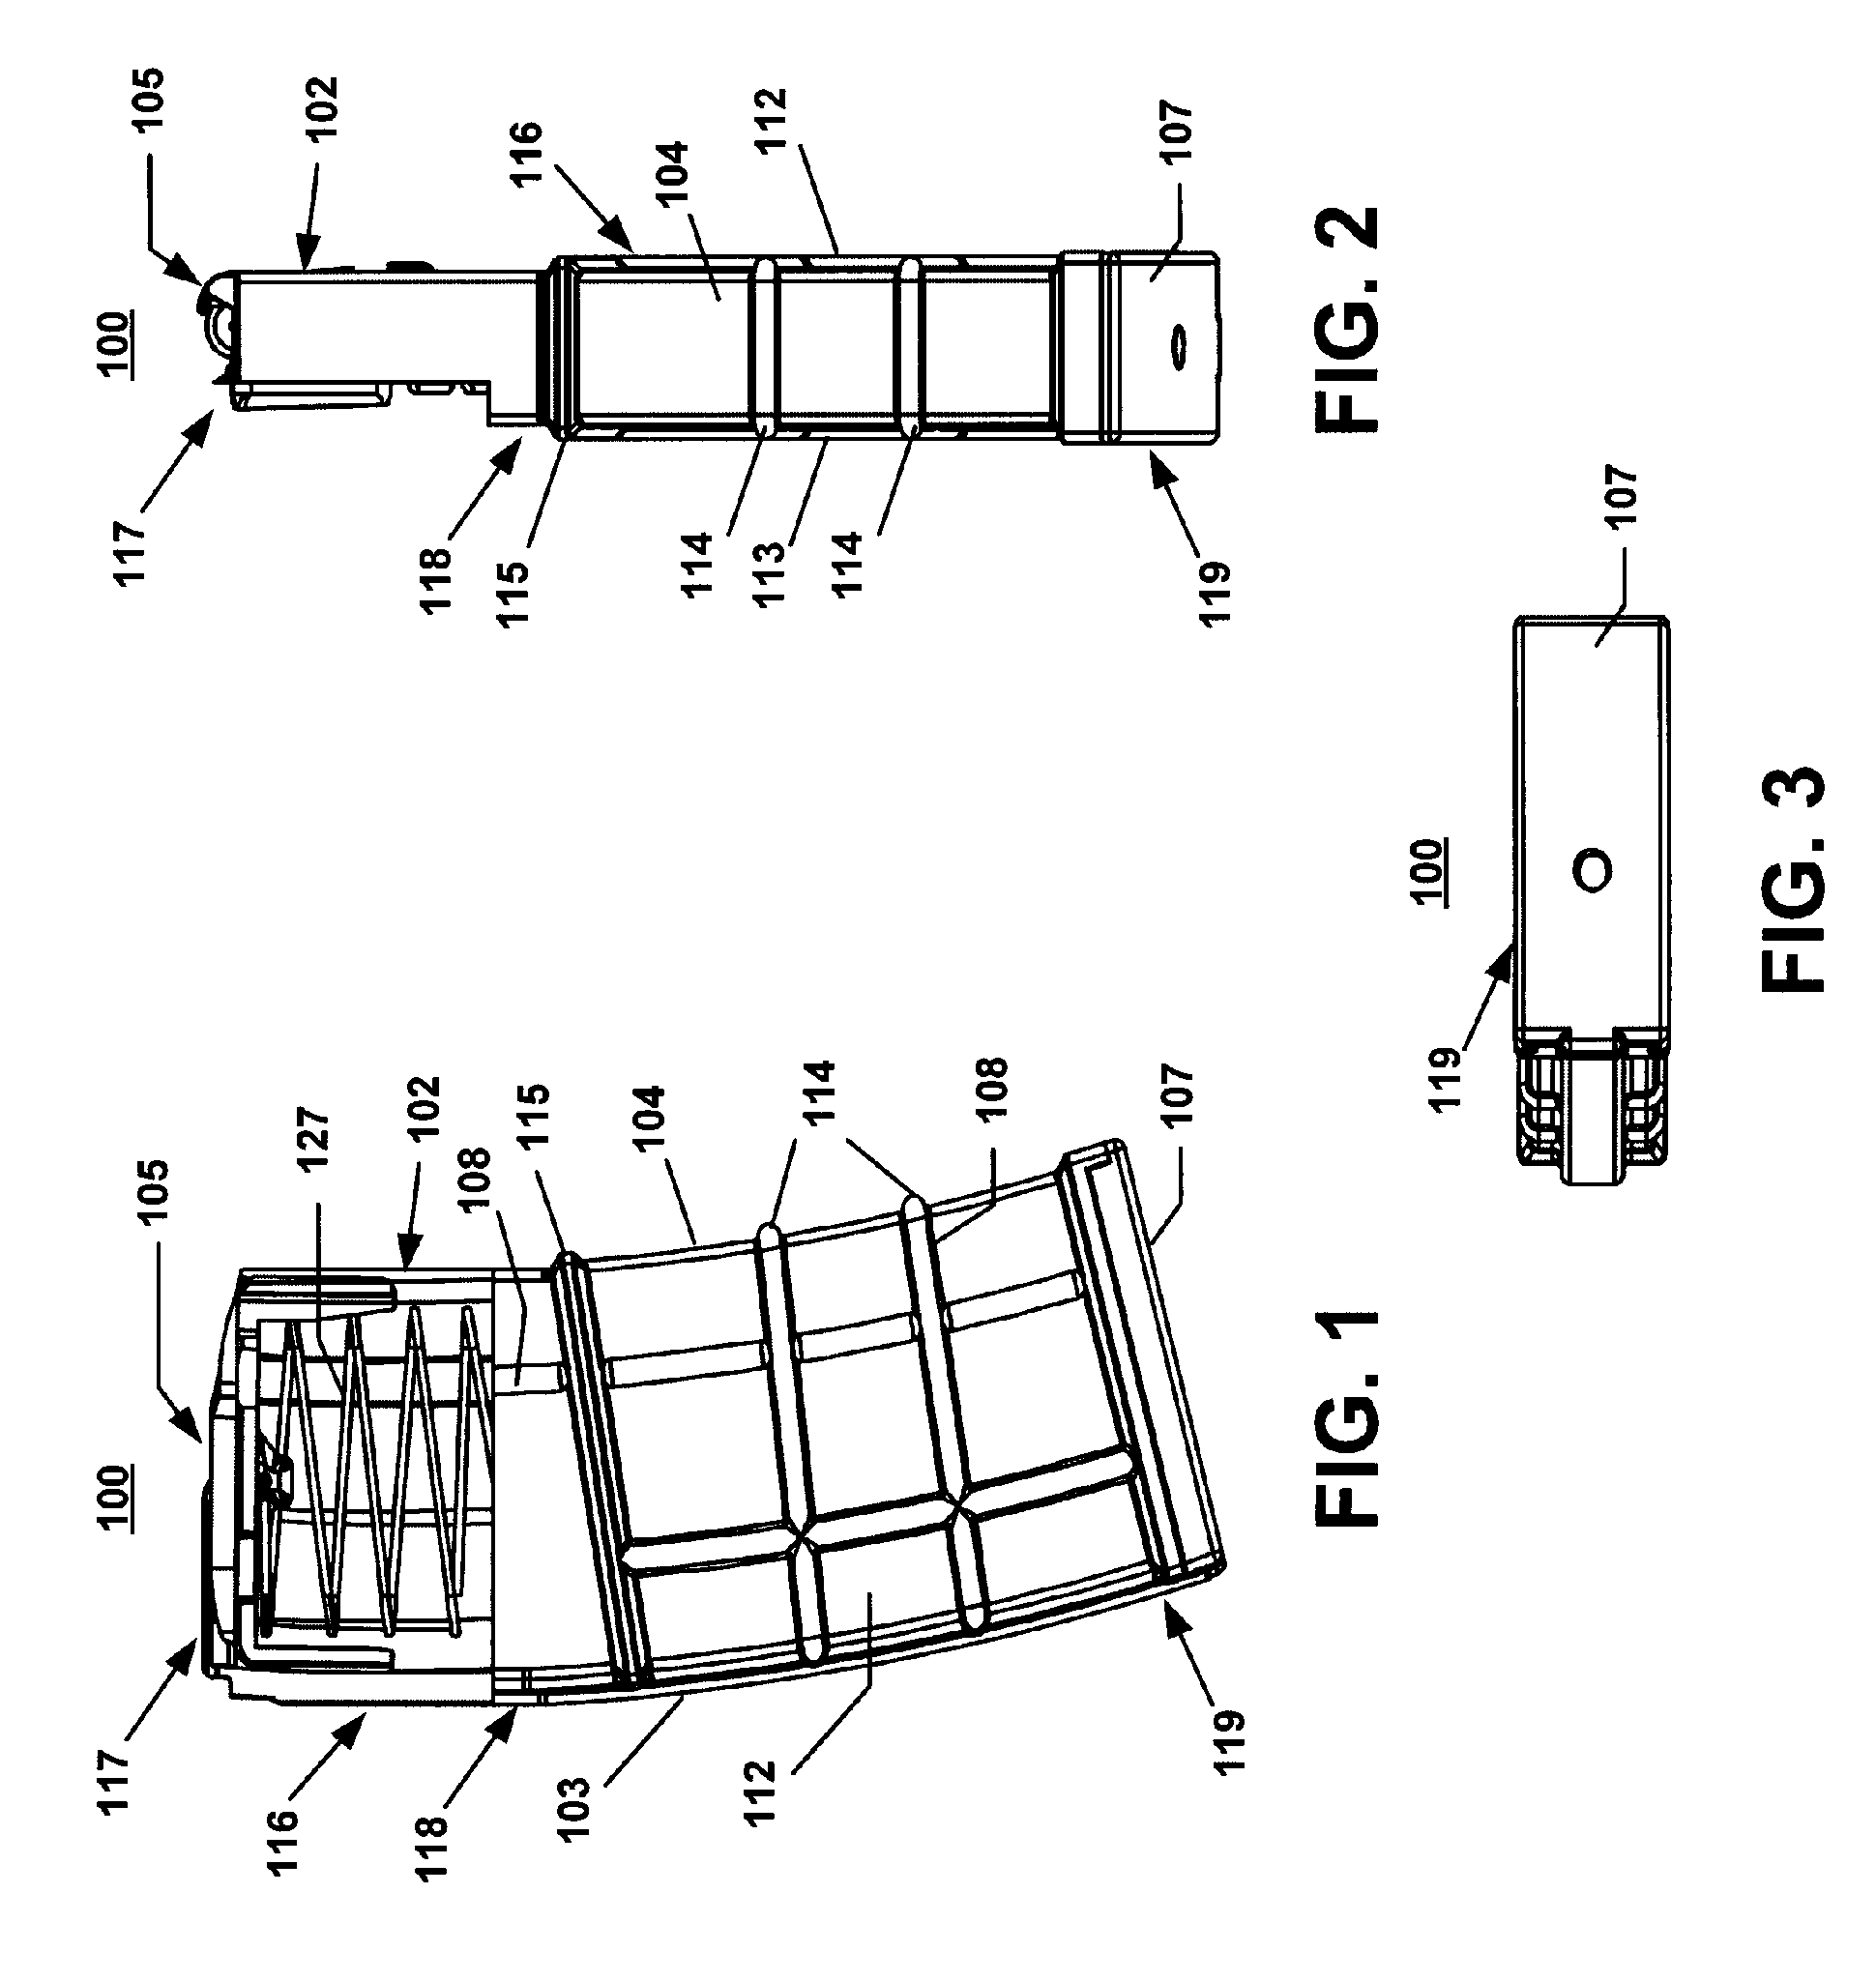 Composite magazine for chambering ammunition in a firearm